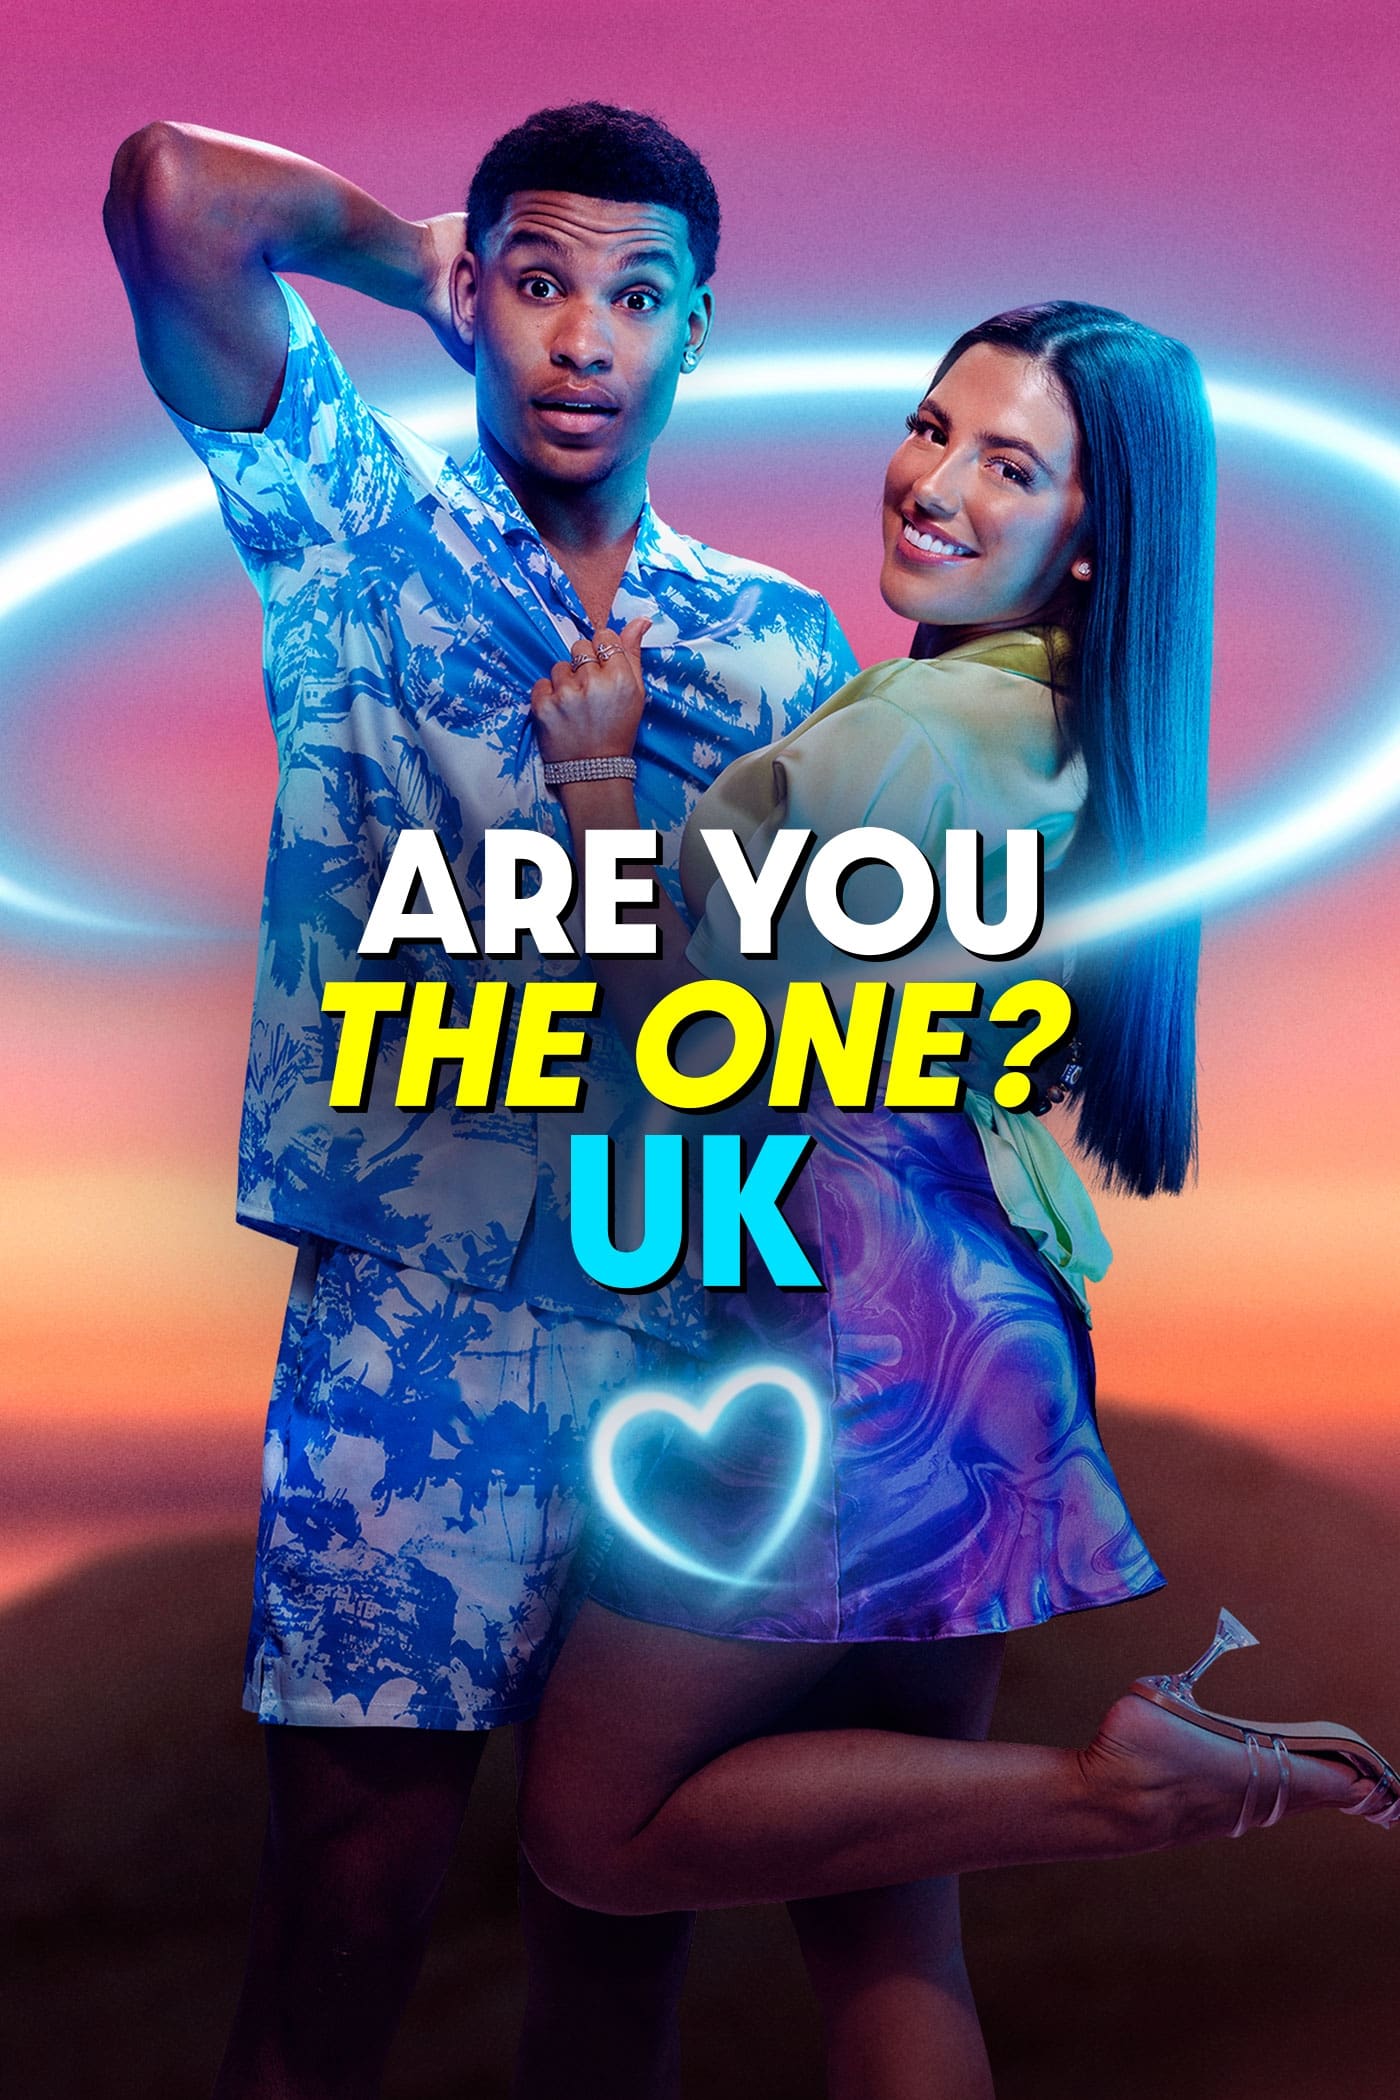 Are You The One? UK TV Shows About Dating Show